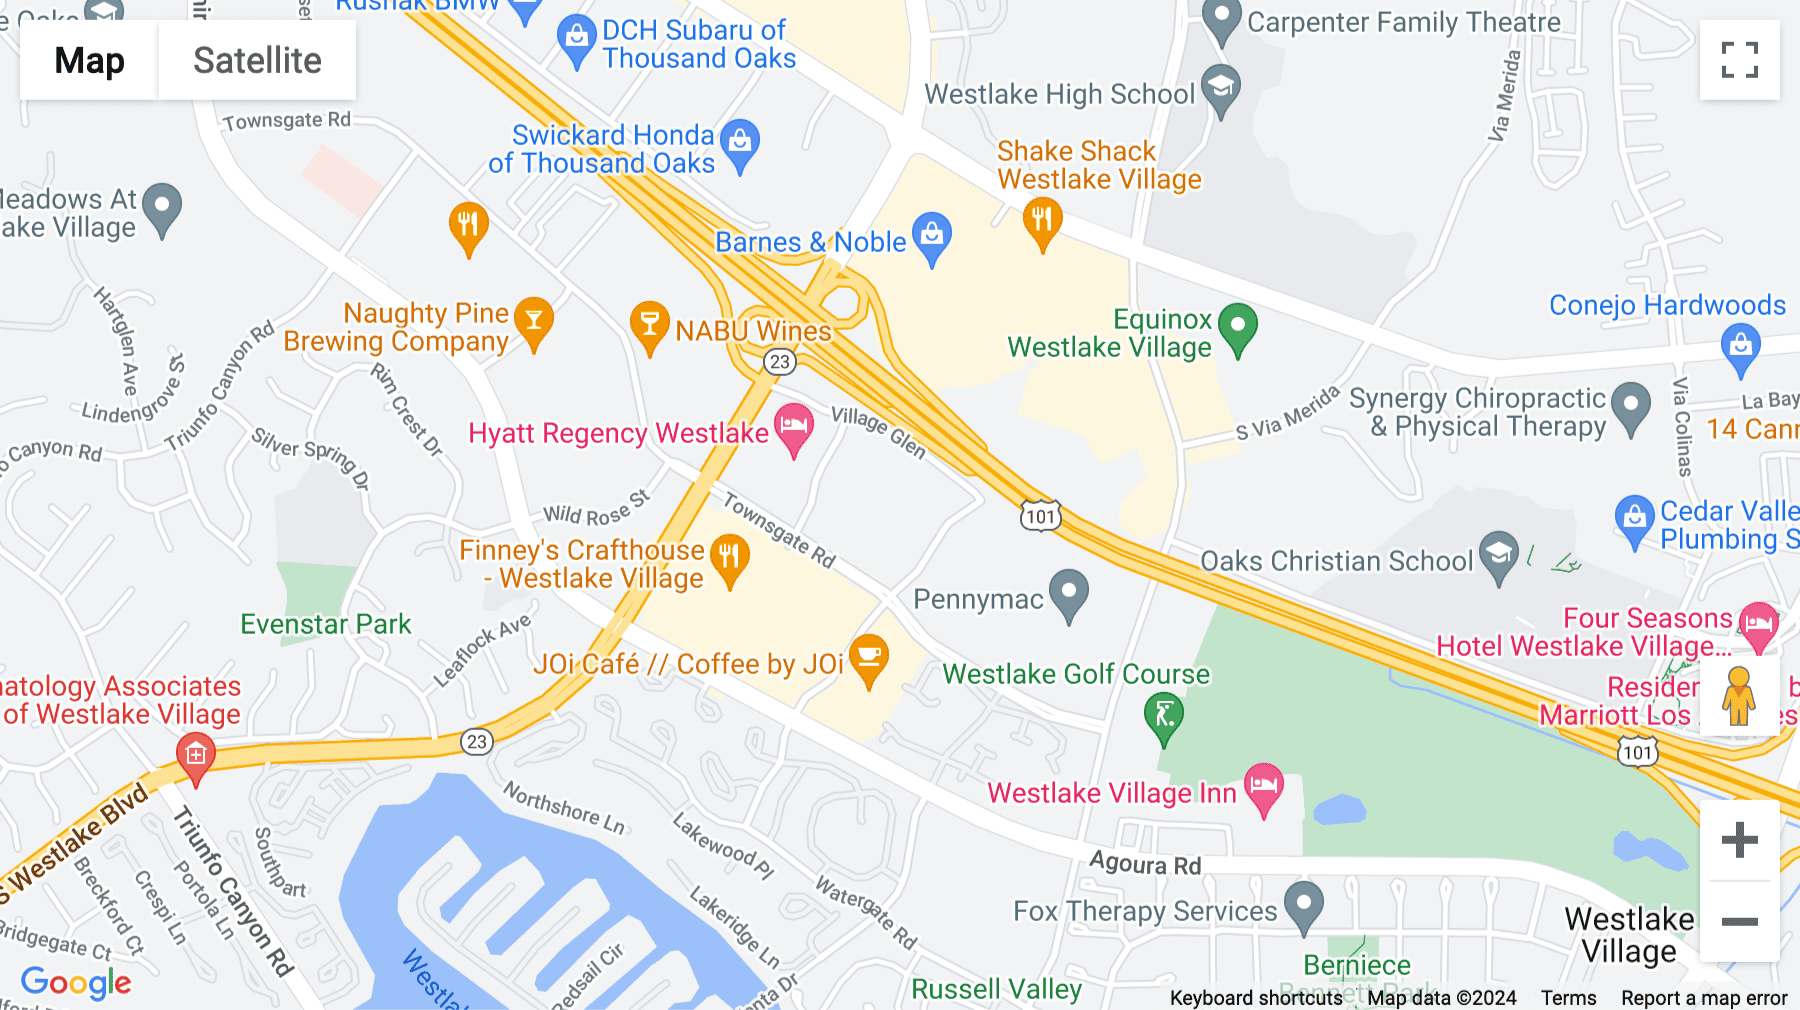 Click for interative map of (WLV) 2829 Townsgate Road, Suite 100, Westlake Village